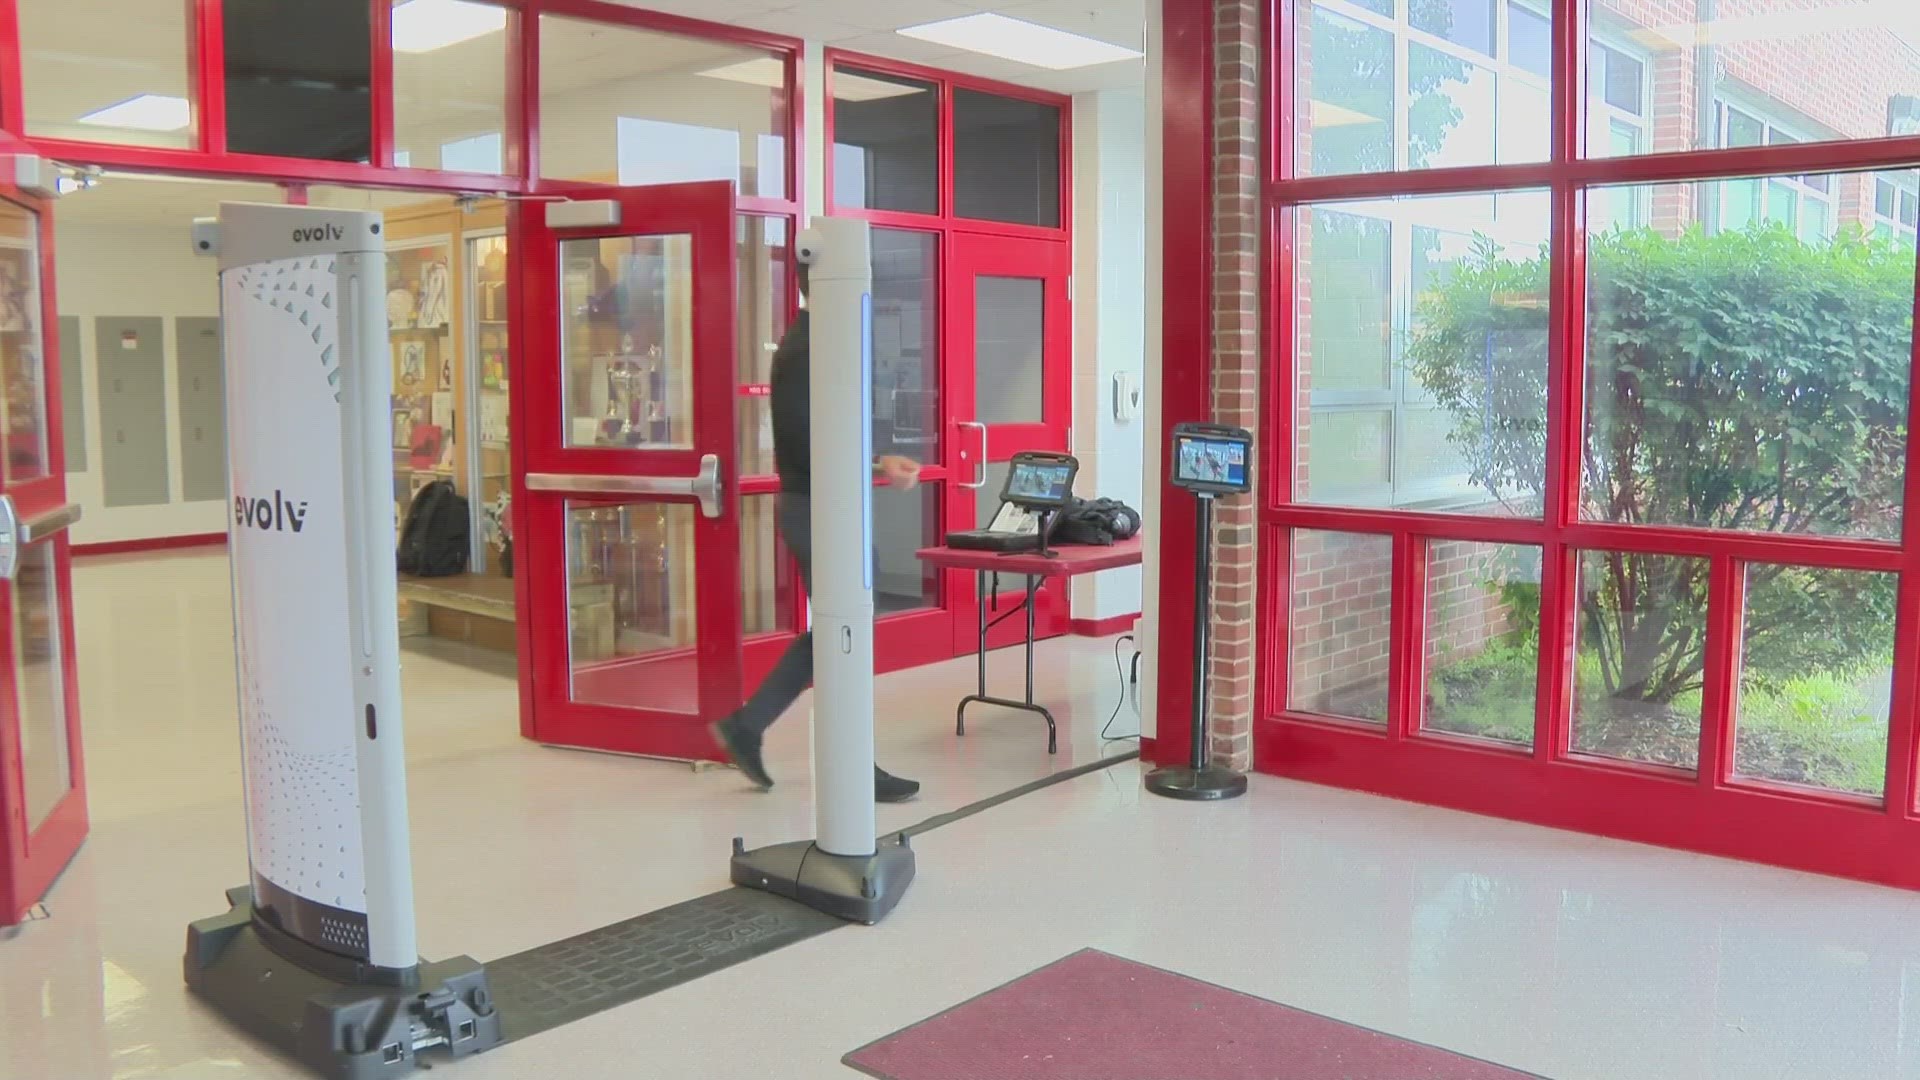 Eastern High School will be in the first round of installations in October.